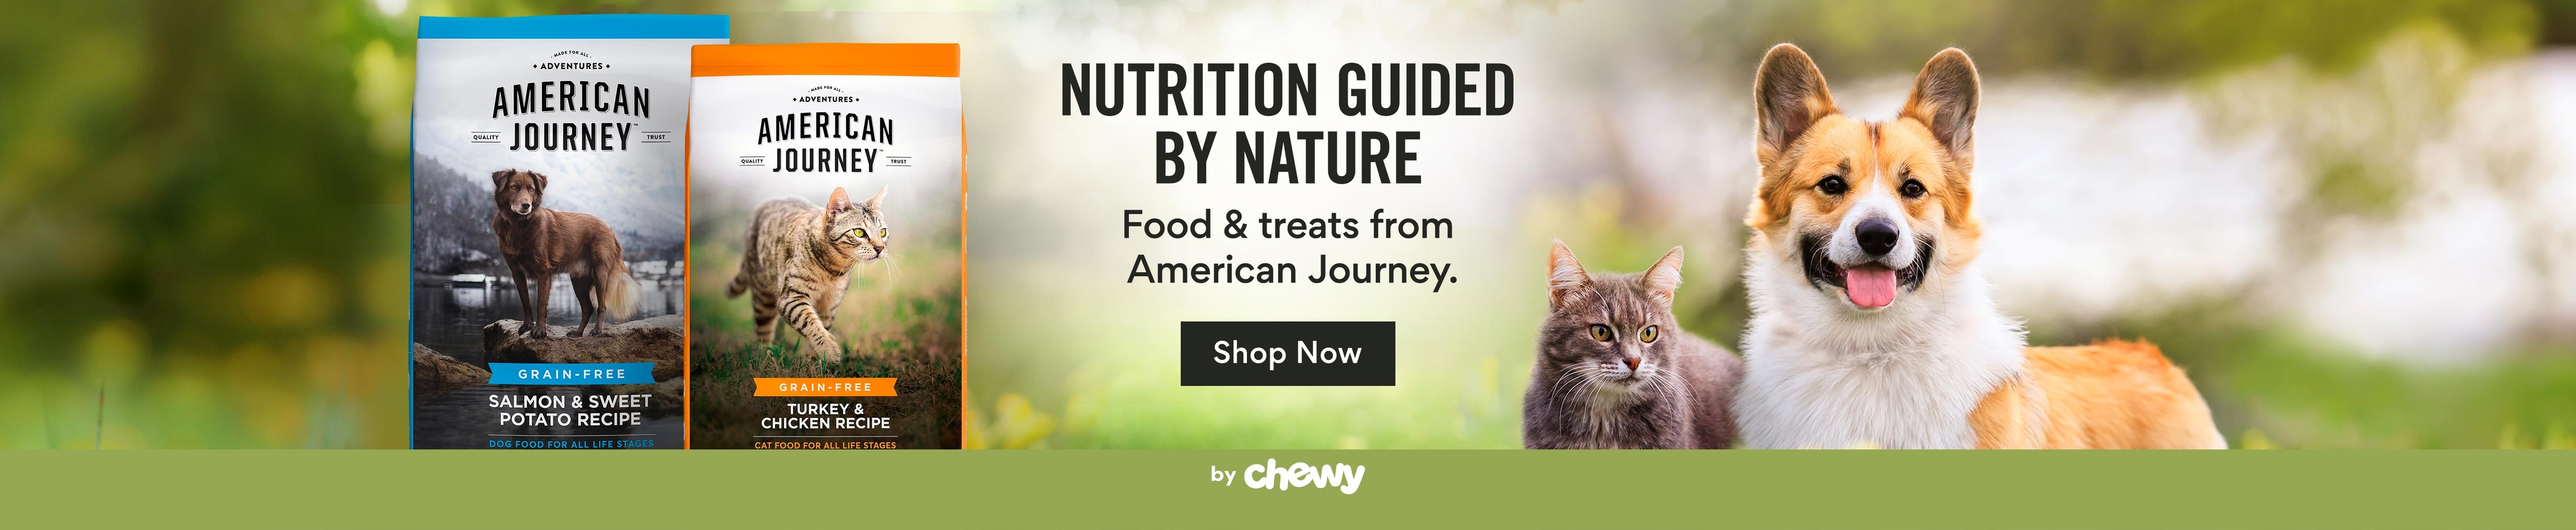 nutrition guided by nature. Food and treats from American Journey by chewy.